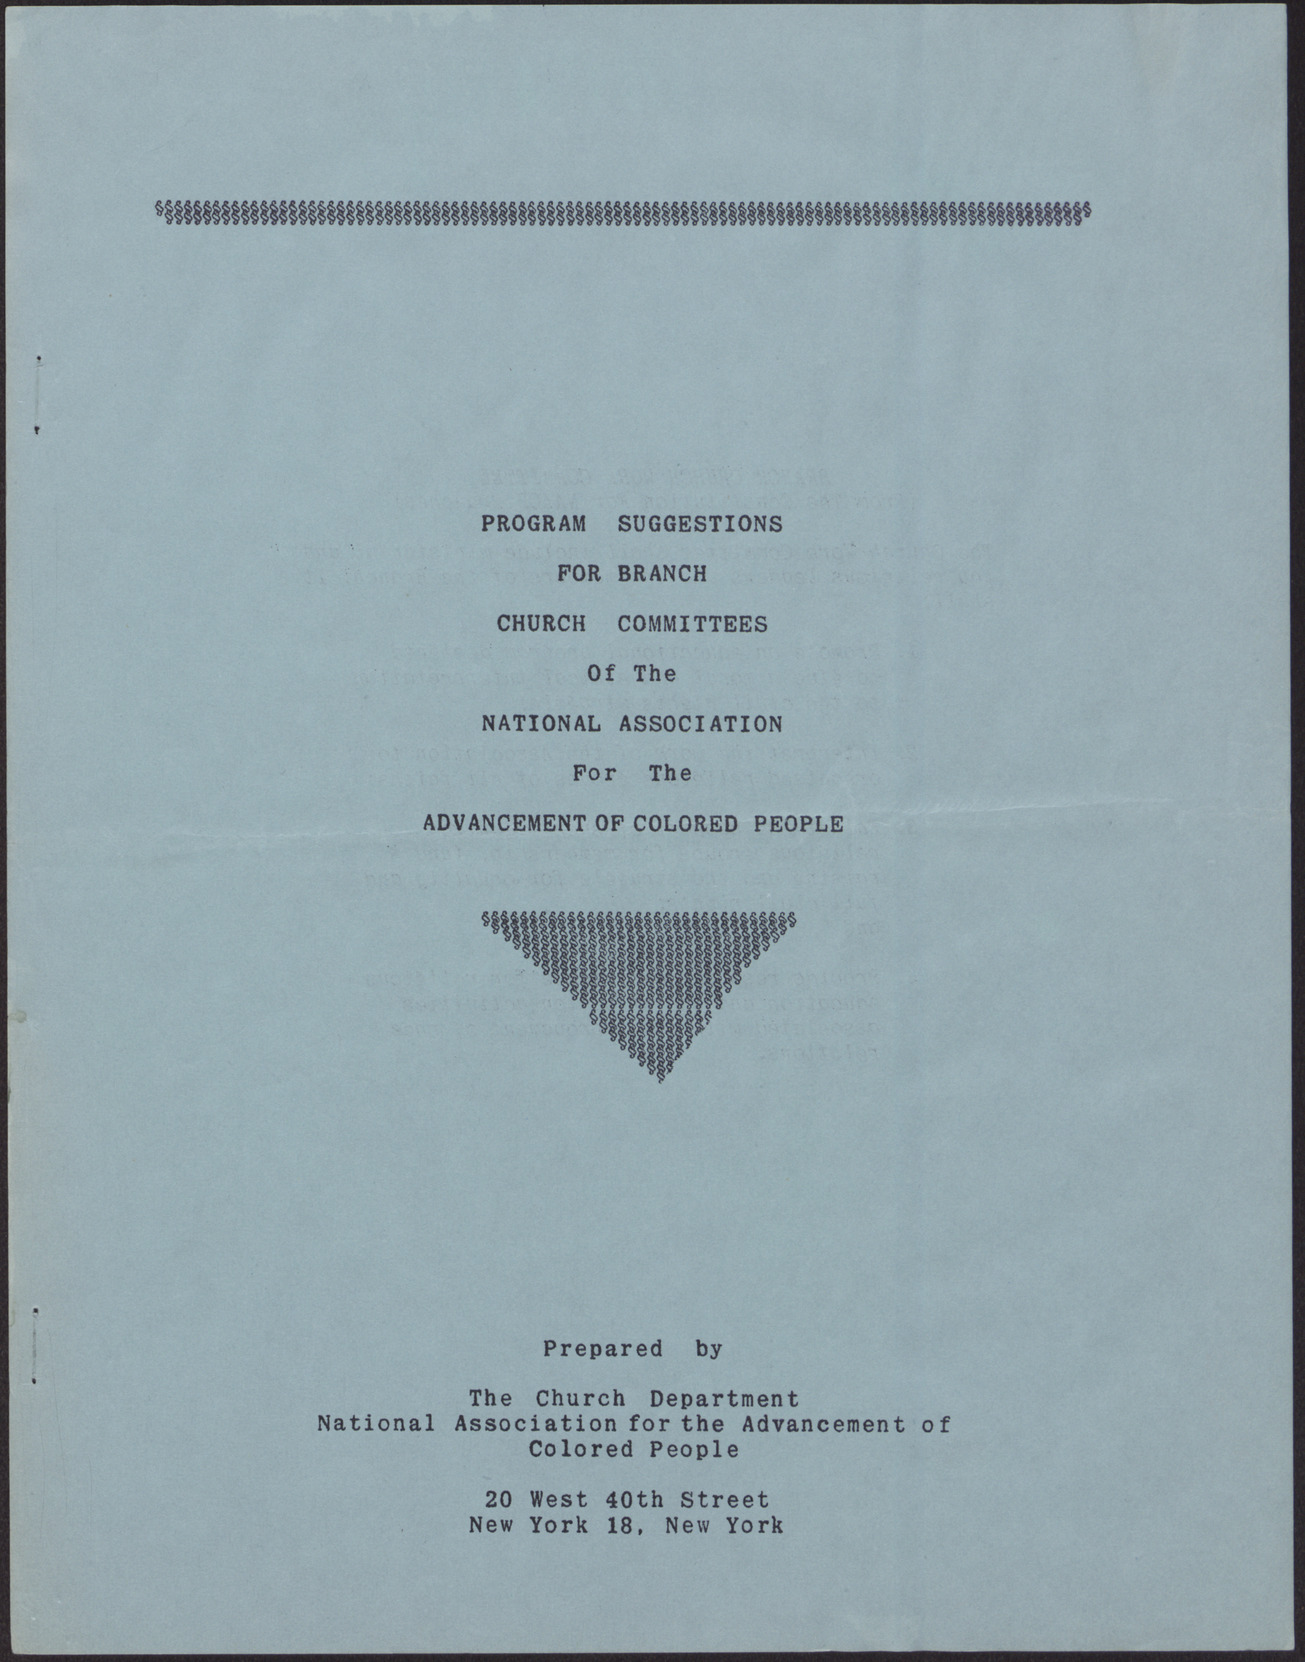 Program Suggestions for Branch Church Committees of the National Association for the Advancement of Colored People (9 pages), no date